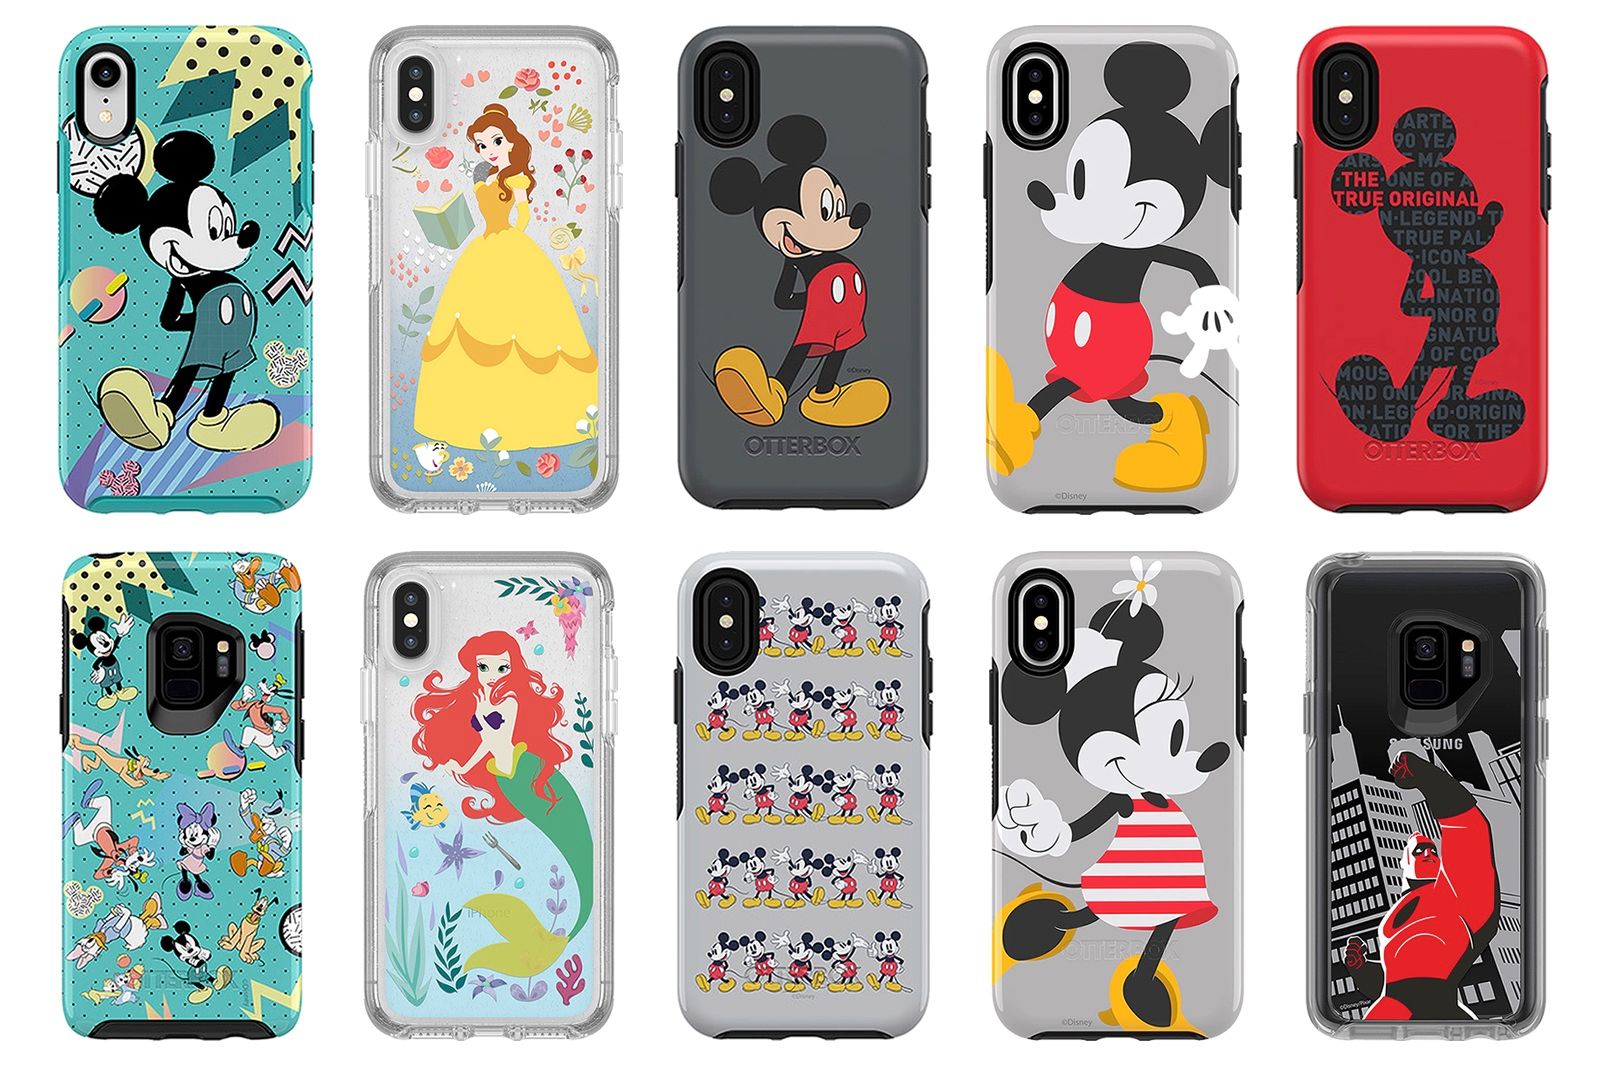 Best Disney Otterbox cases Protection fit for a Princess or a mouse image 1